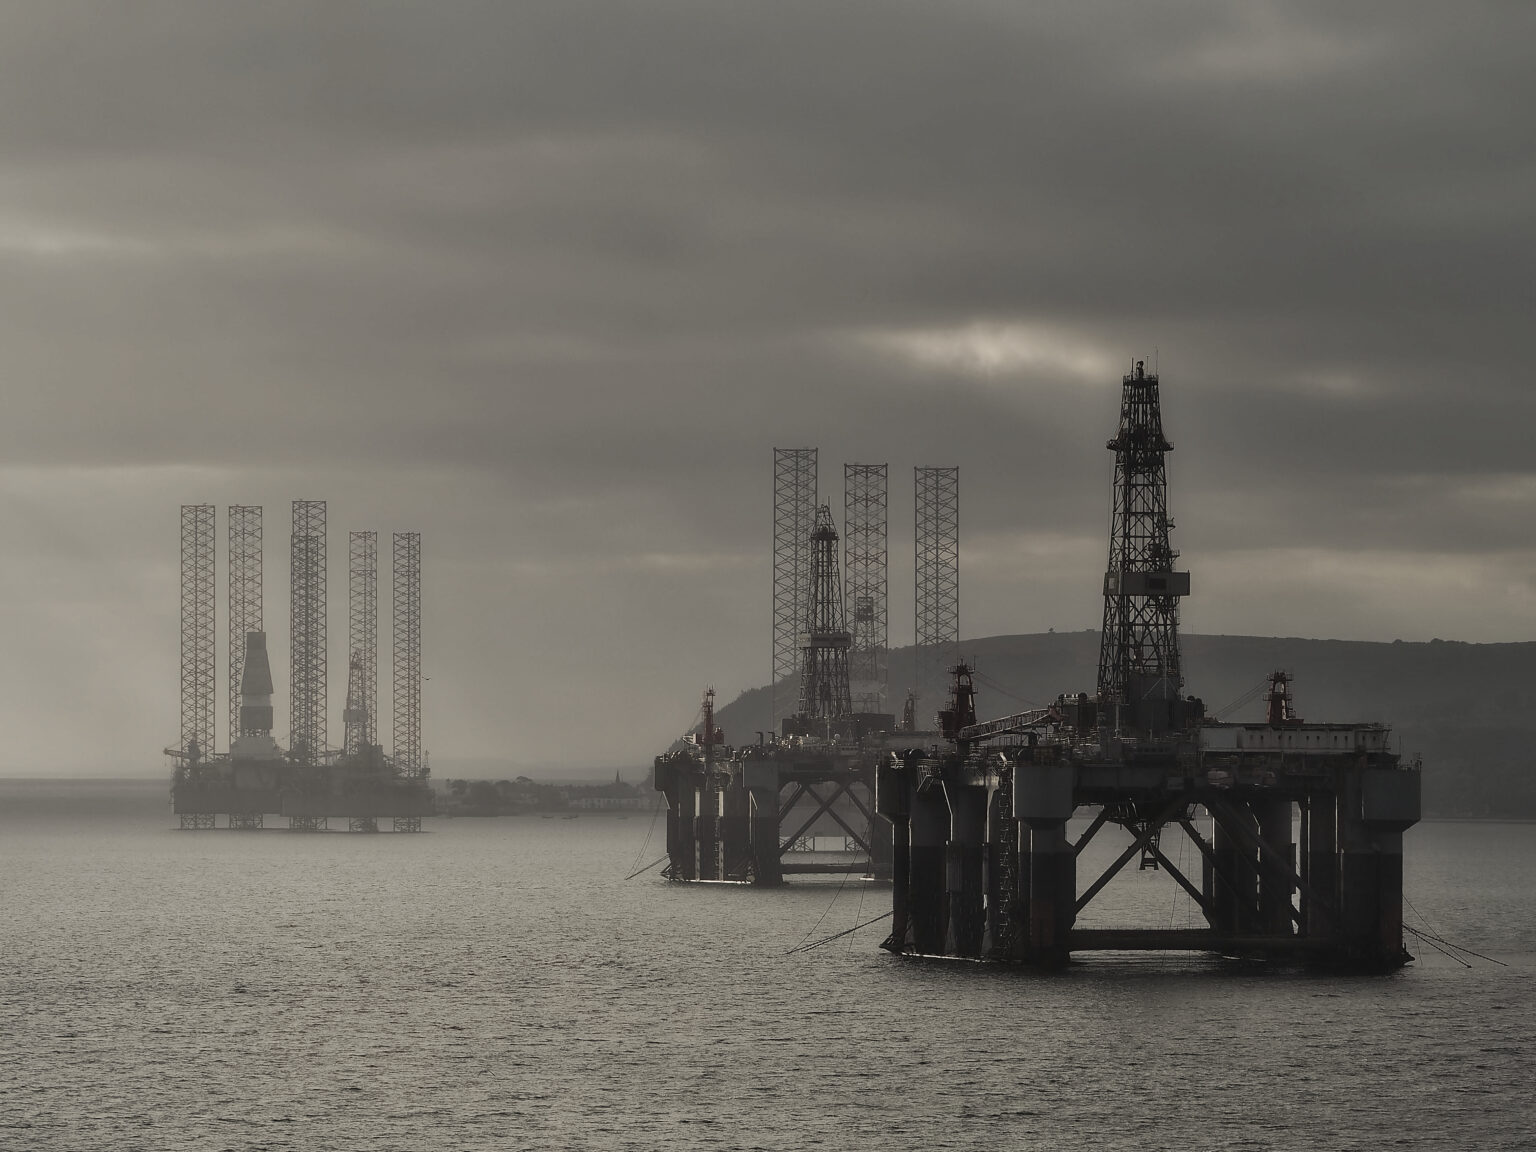 This atmospheric photo in shades of black and white shows oil platforms rising from the sea amid clouds.